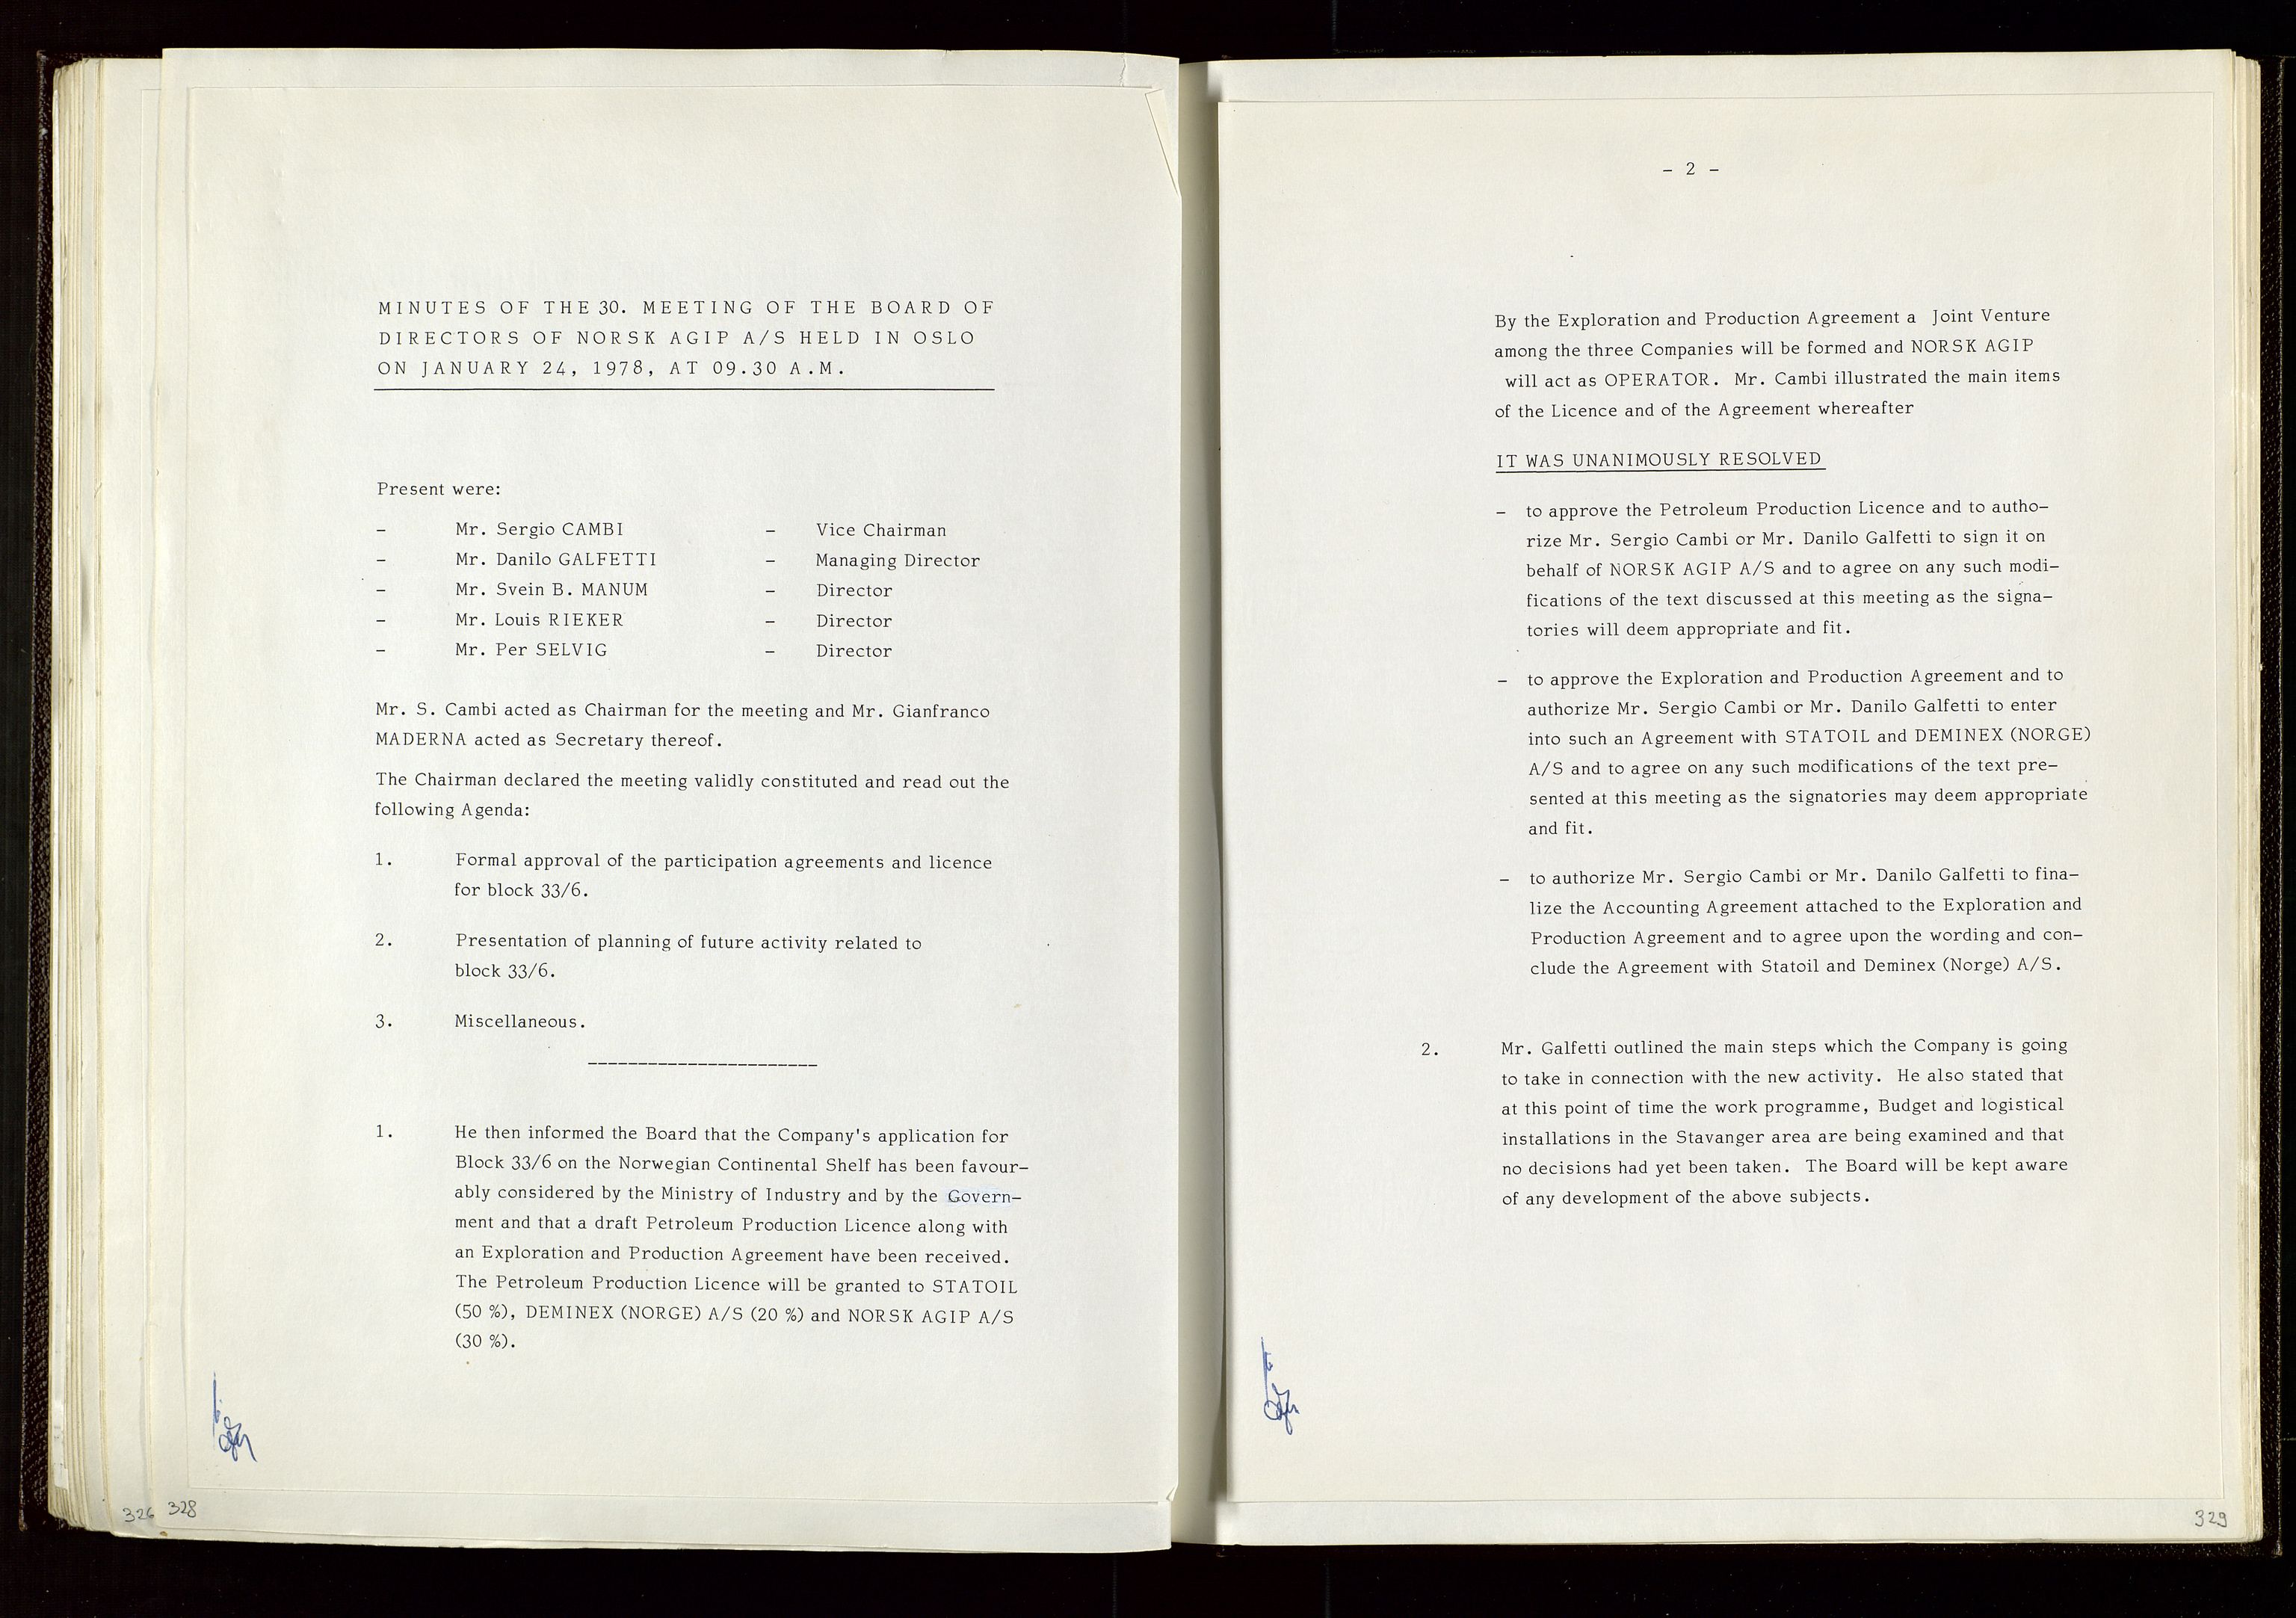 Pa 1583 - Norsk Agip AS, SAST/A-102138/A/Aa/L0002: General assembly and Board of Directors meeting minutes, 1972-1979, s. 328-329